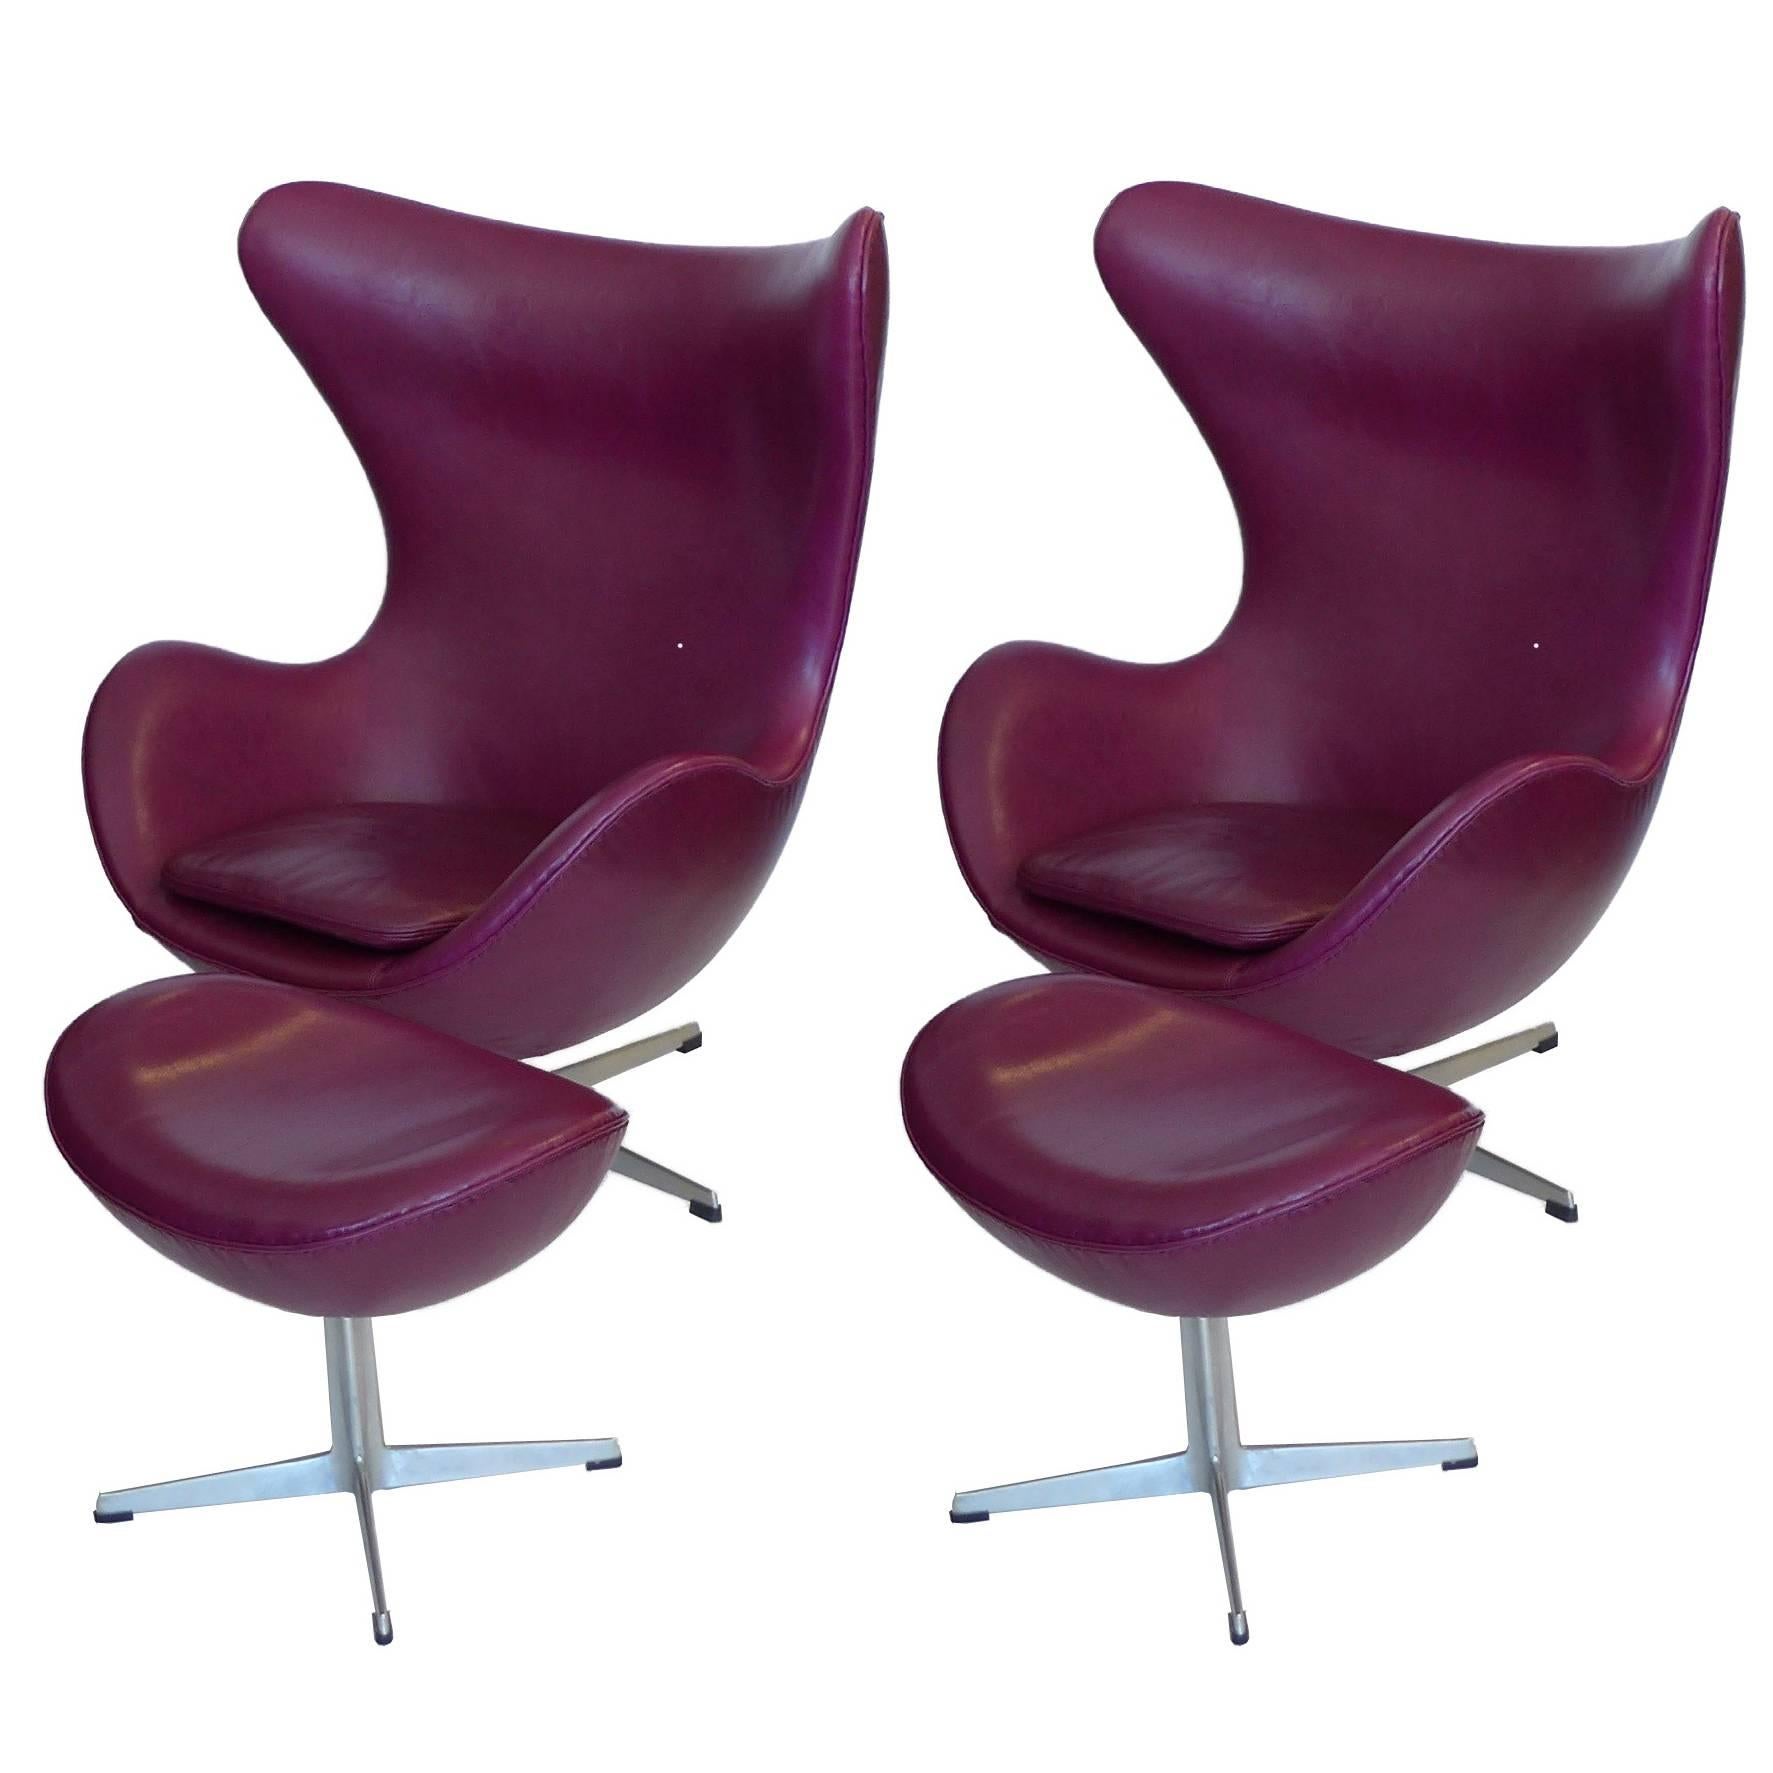 Pair of Original Egg Chairs with Ottomans by Arne Jacobsen in Mulberry Leather For Sale